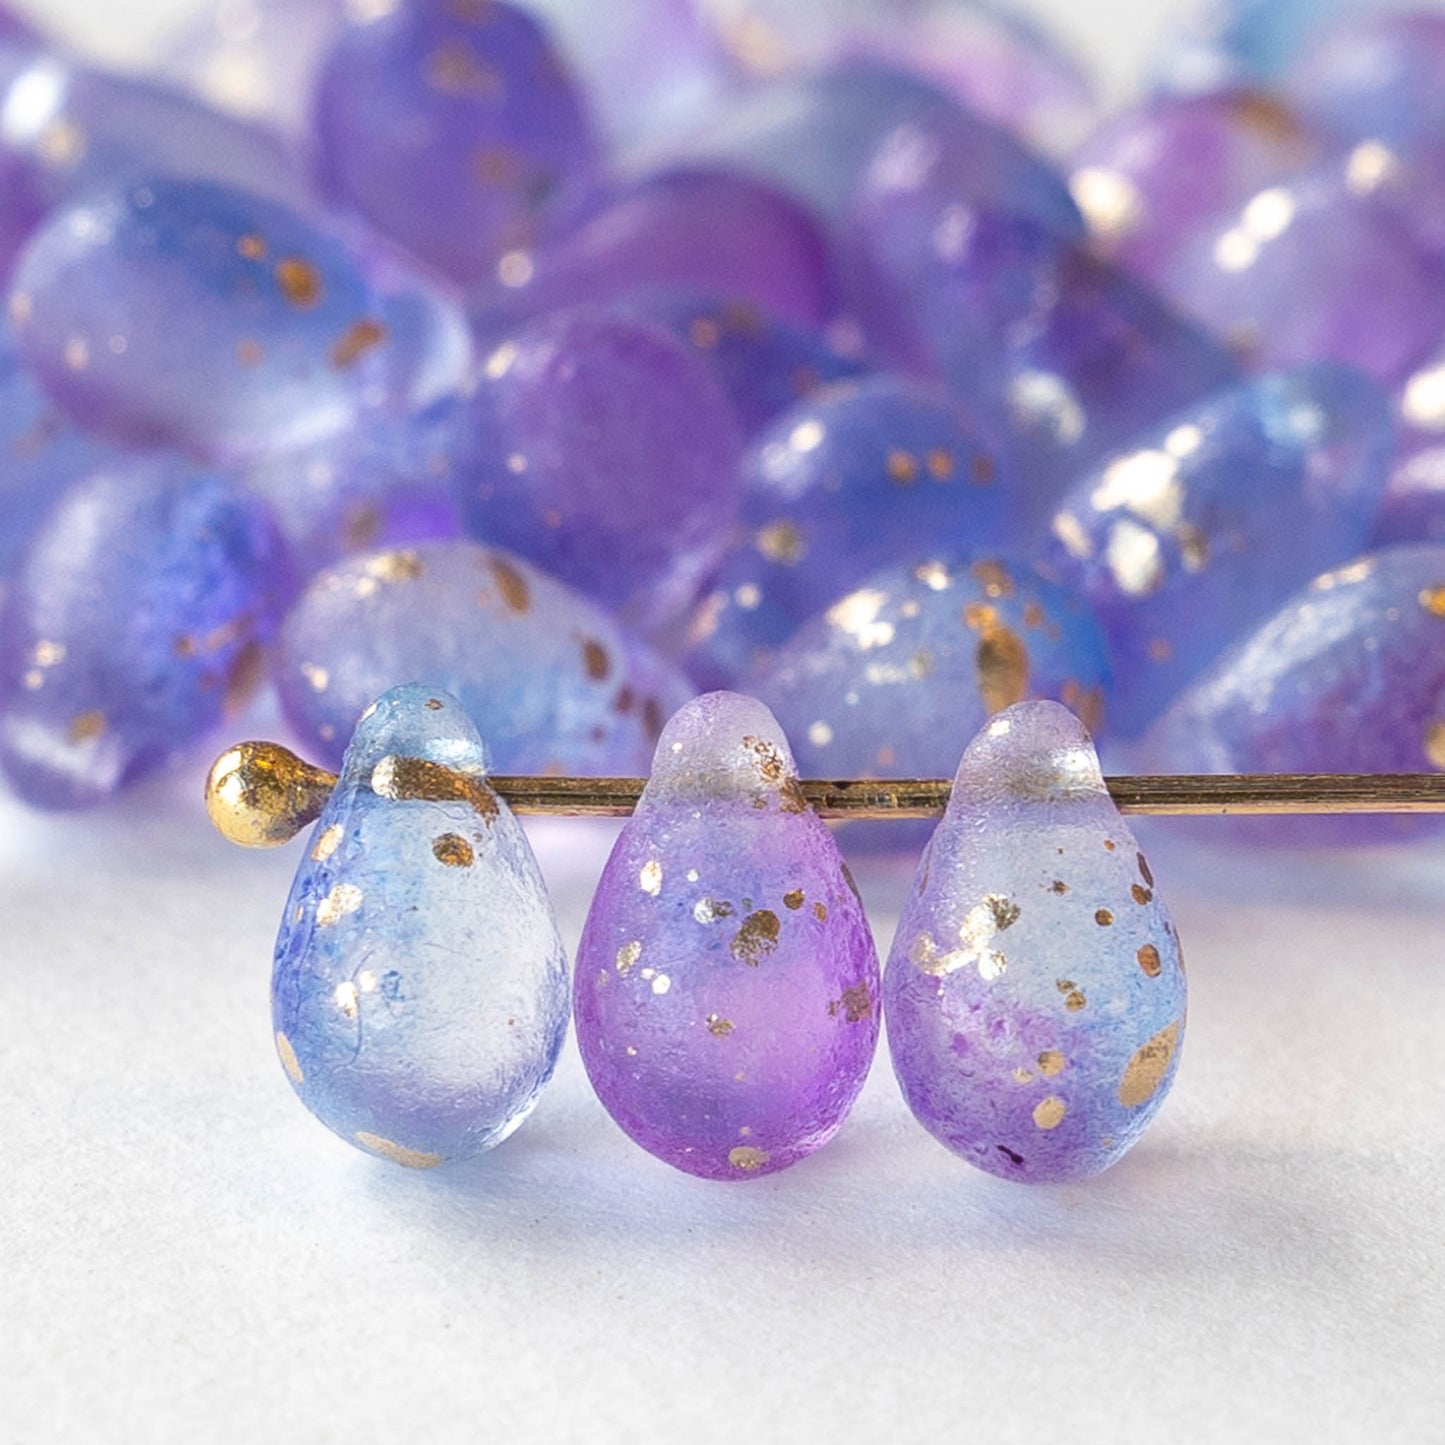 Load image into Gallery viewer, 6x9mm Glass Teardrop Beads - Matte Lavender blue mix with Gold Dust - 50 Beads
